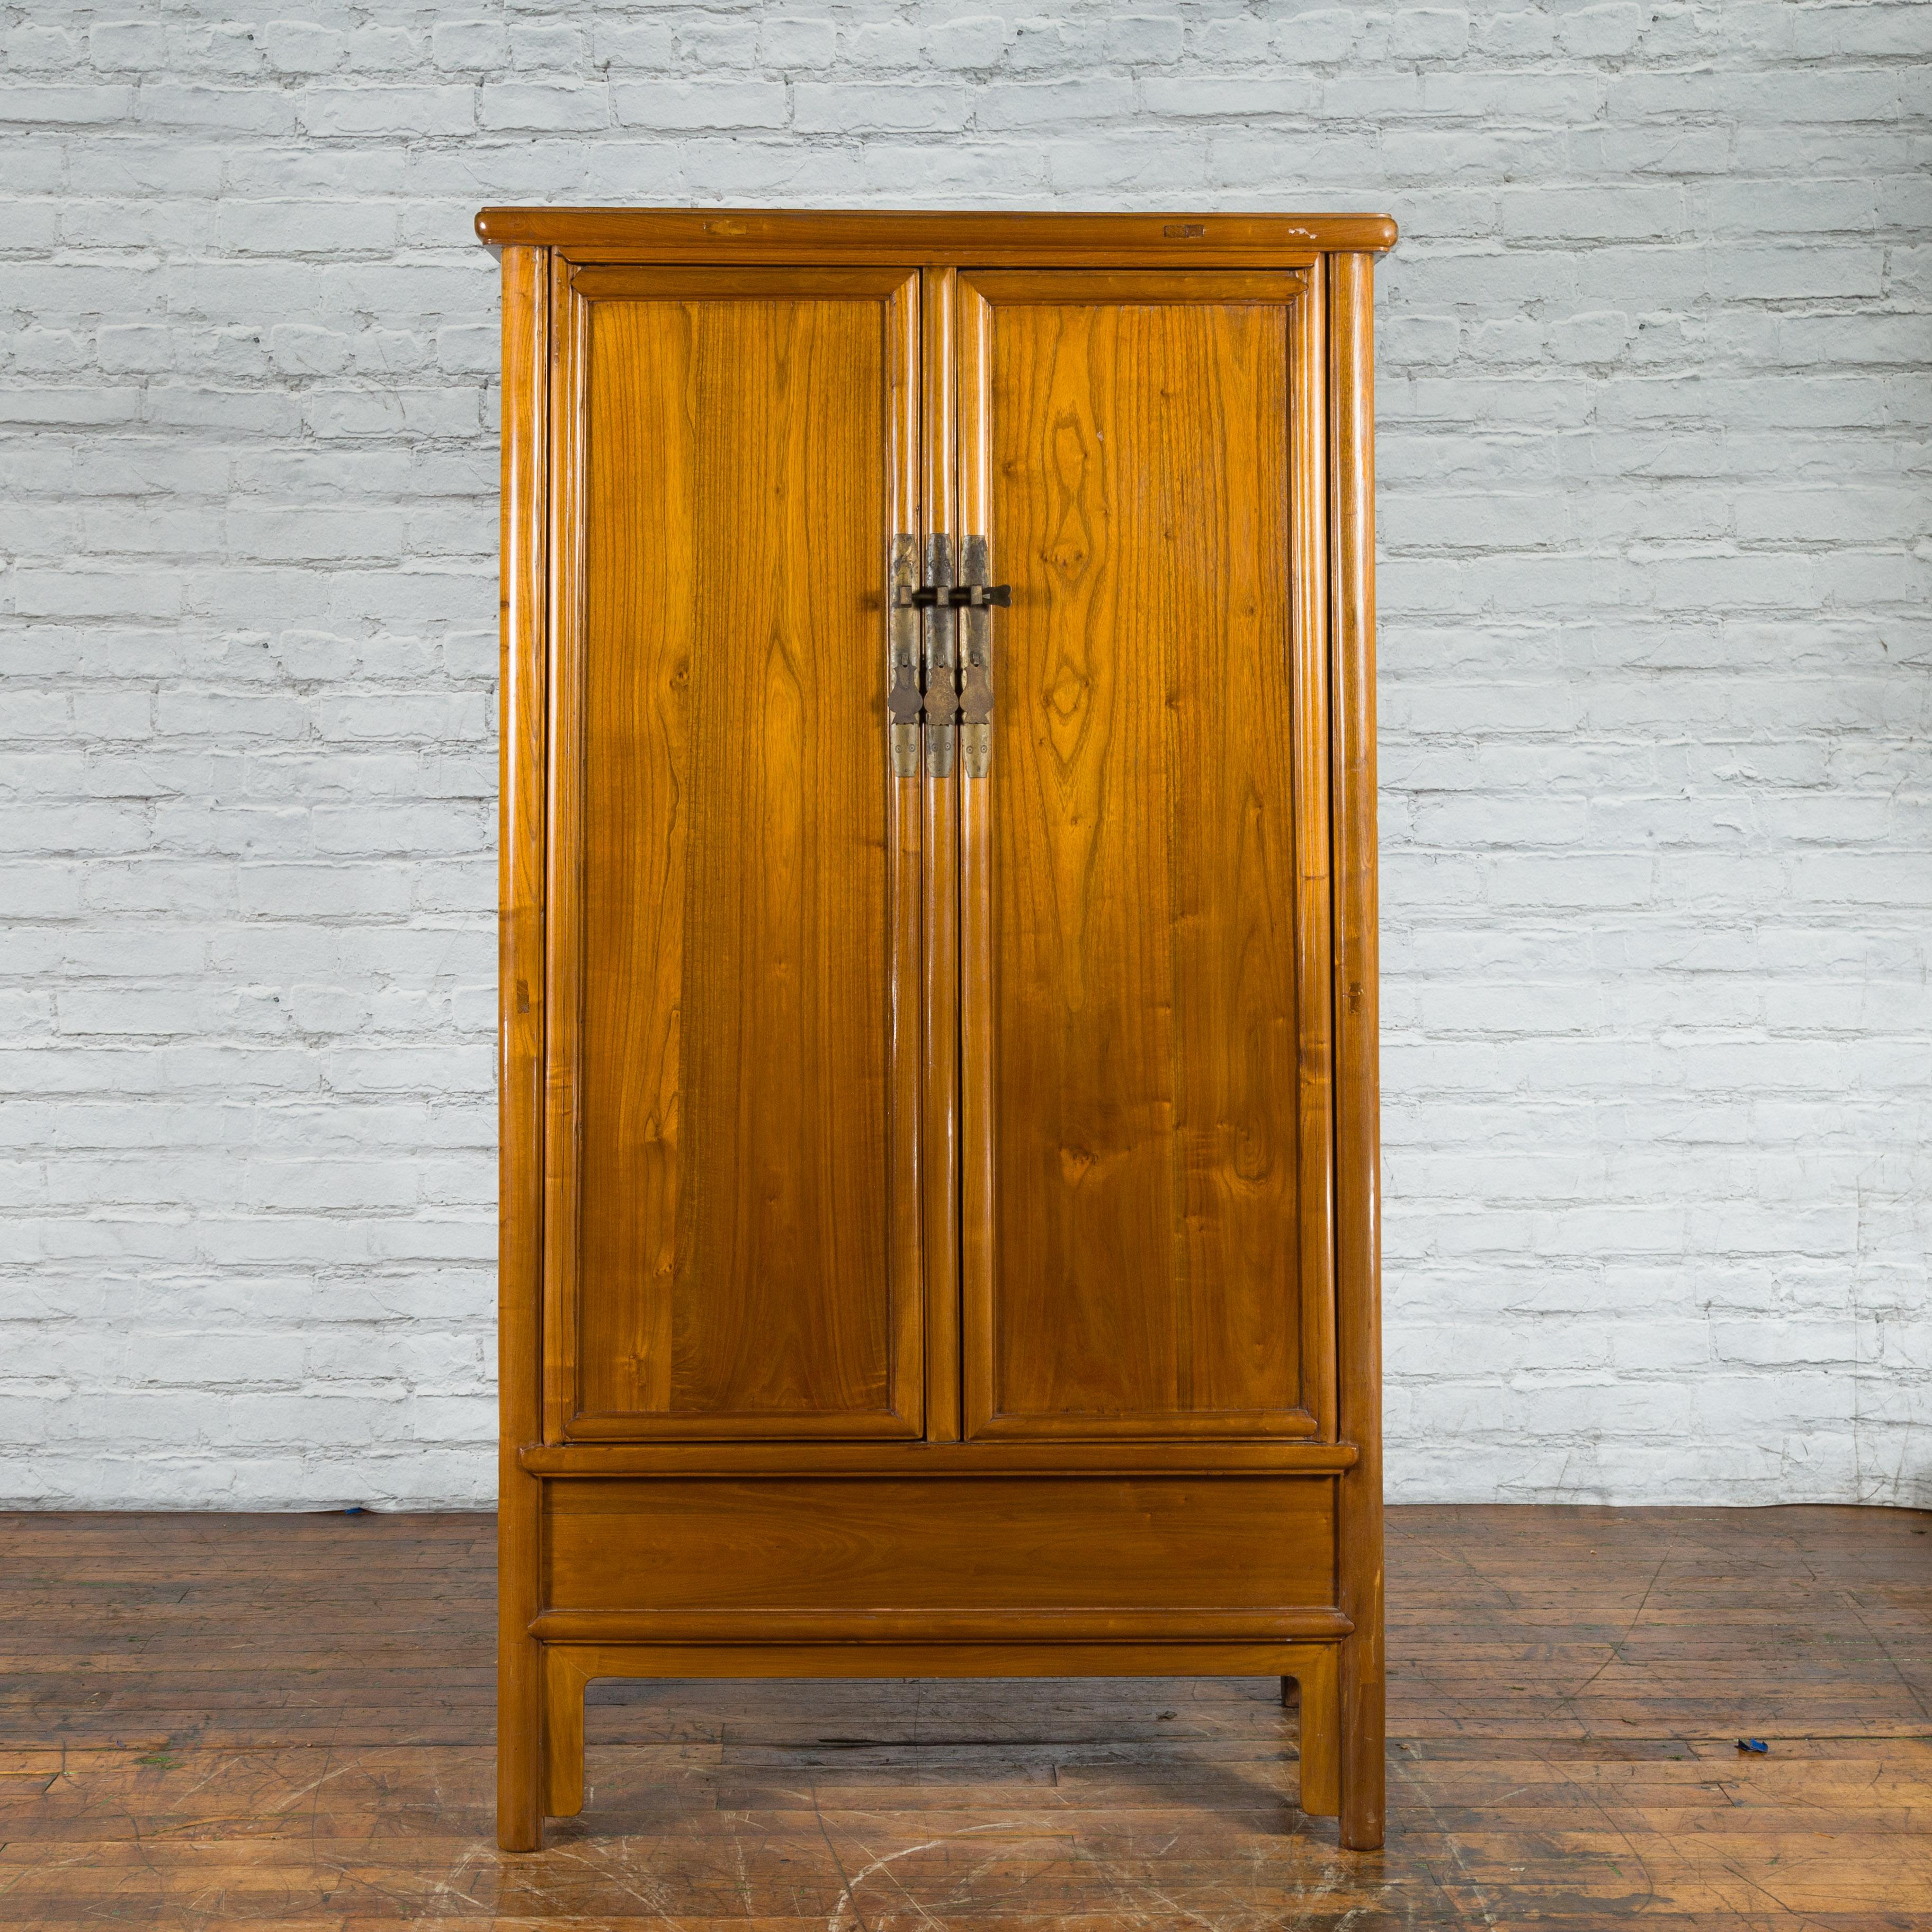 A Chinese Qing Dynasty period elm wood noodle cabinet from the 19th century, with brass hardware, tapering lines and hidden drawers. Created in China during the Qing Dynasty period in the 19th century, this elm wood cabinet draws the attention with